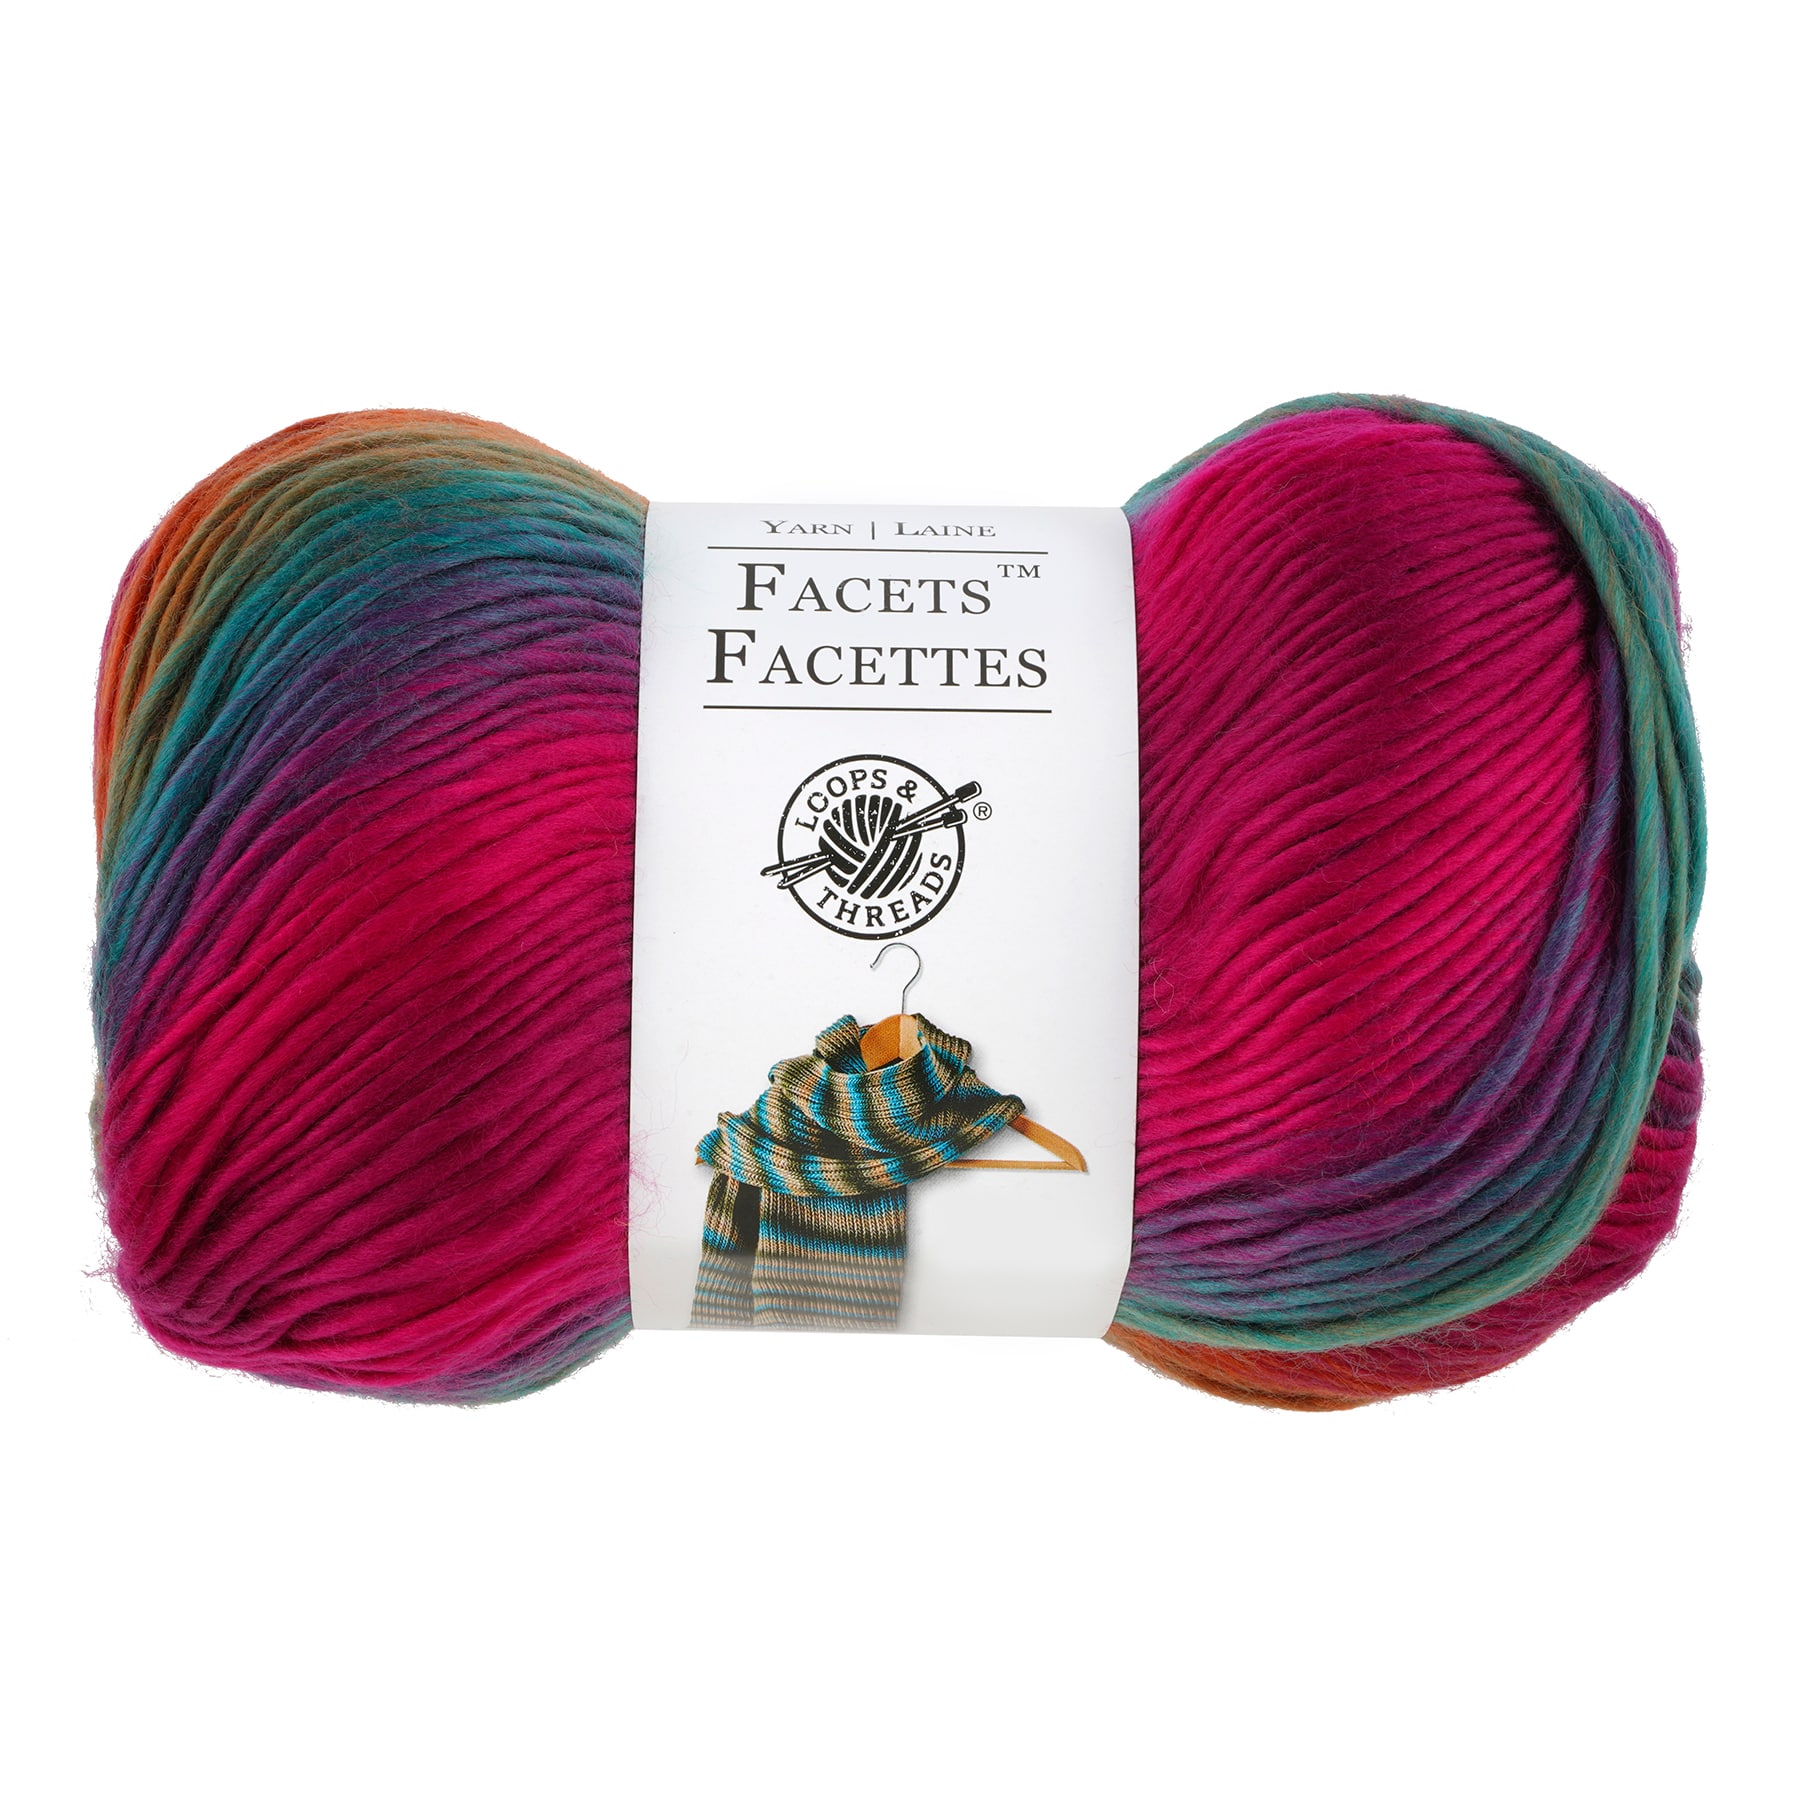 Red Heart Multipack of 6 Dragonfly Boutique Unforgettable Yarn 